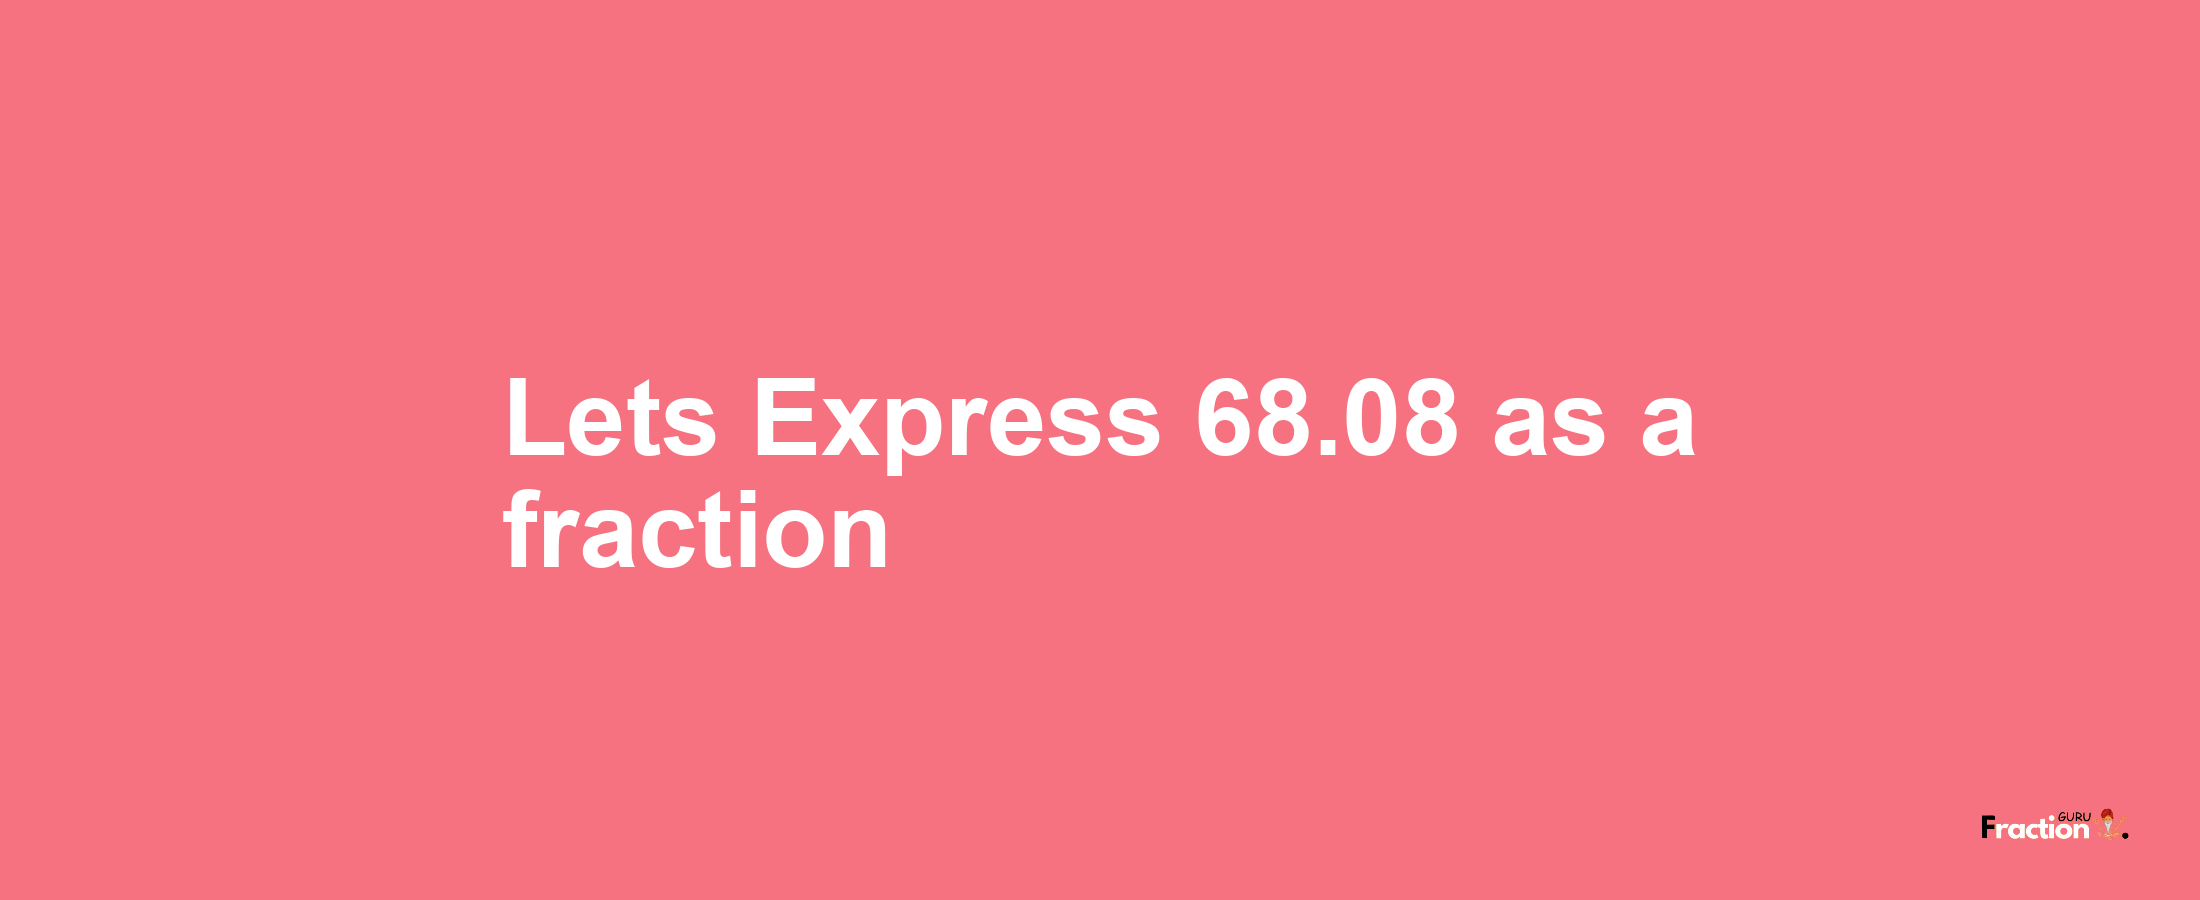 Lets Express 68.08 as afraction